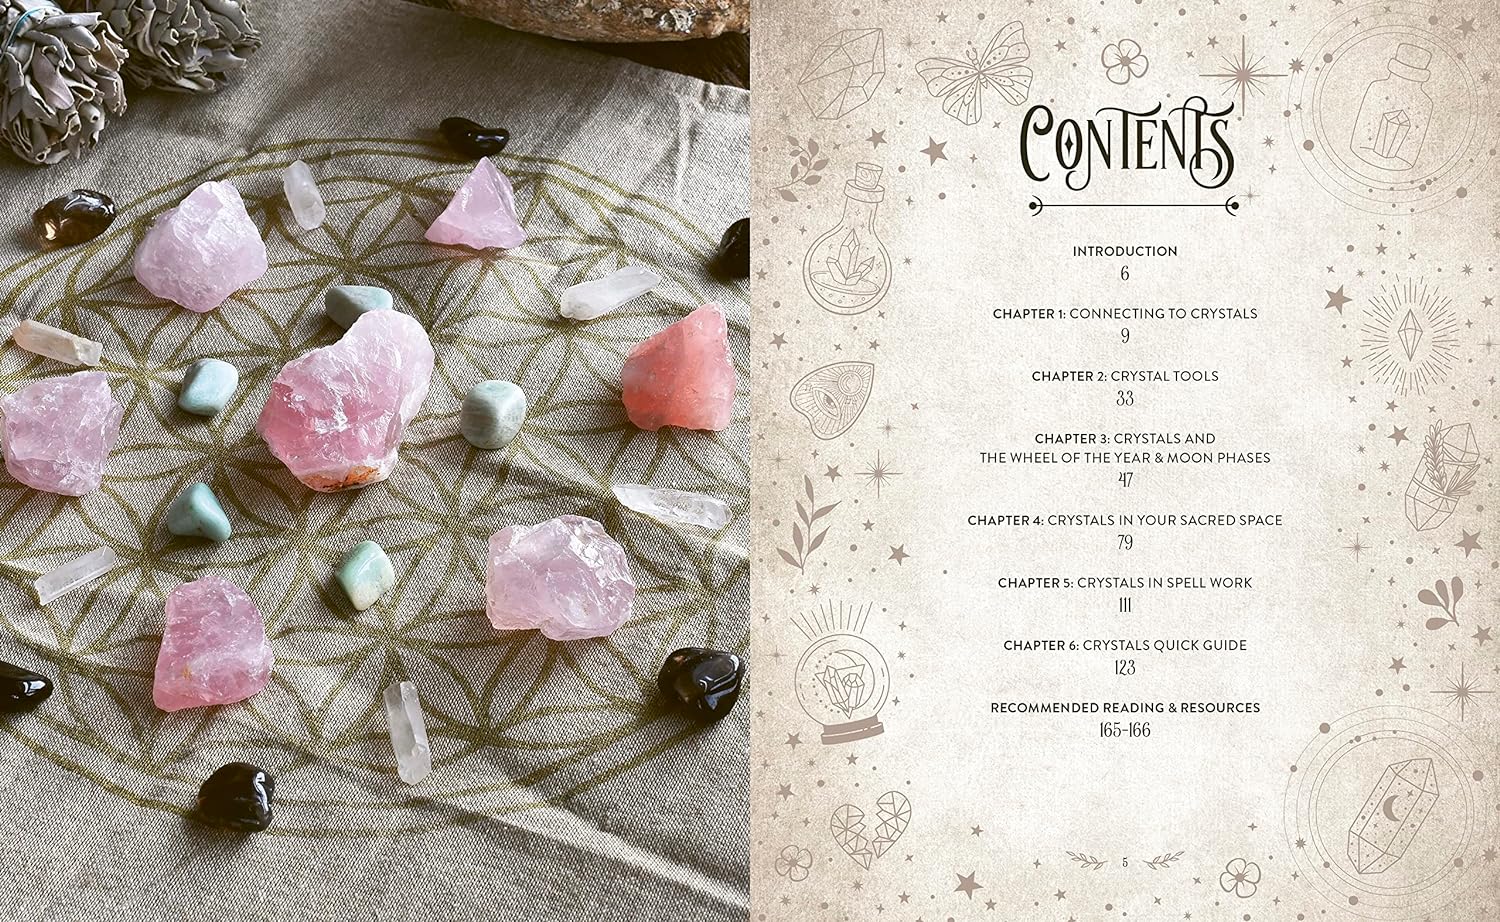 The Witch's Complete Guide To Crystals